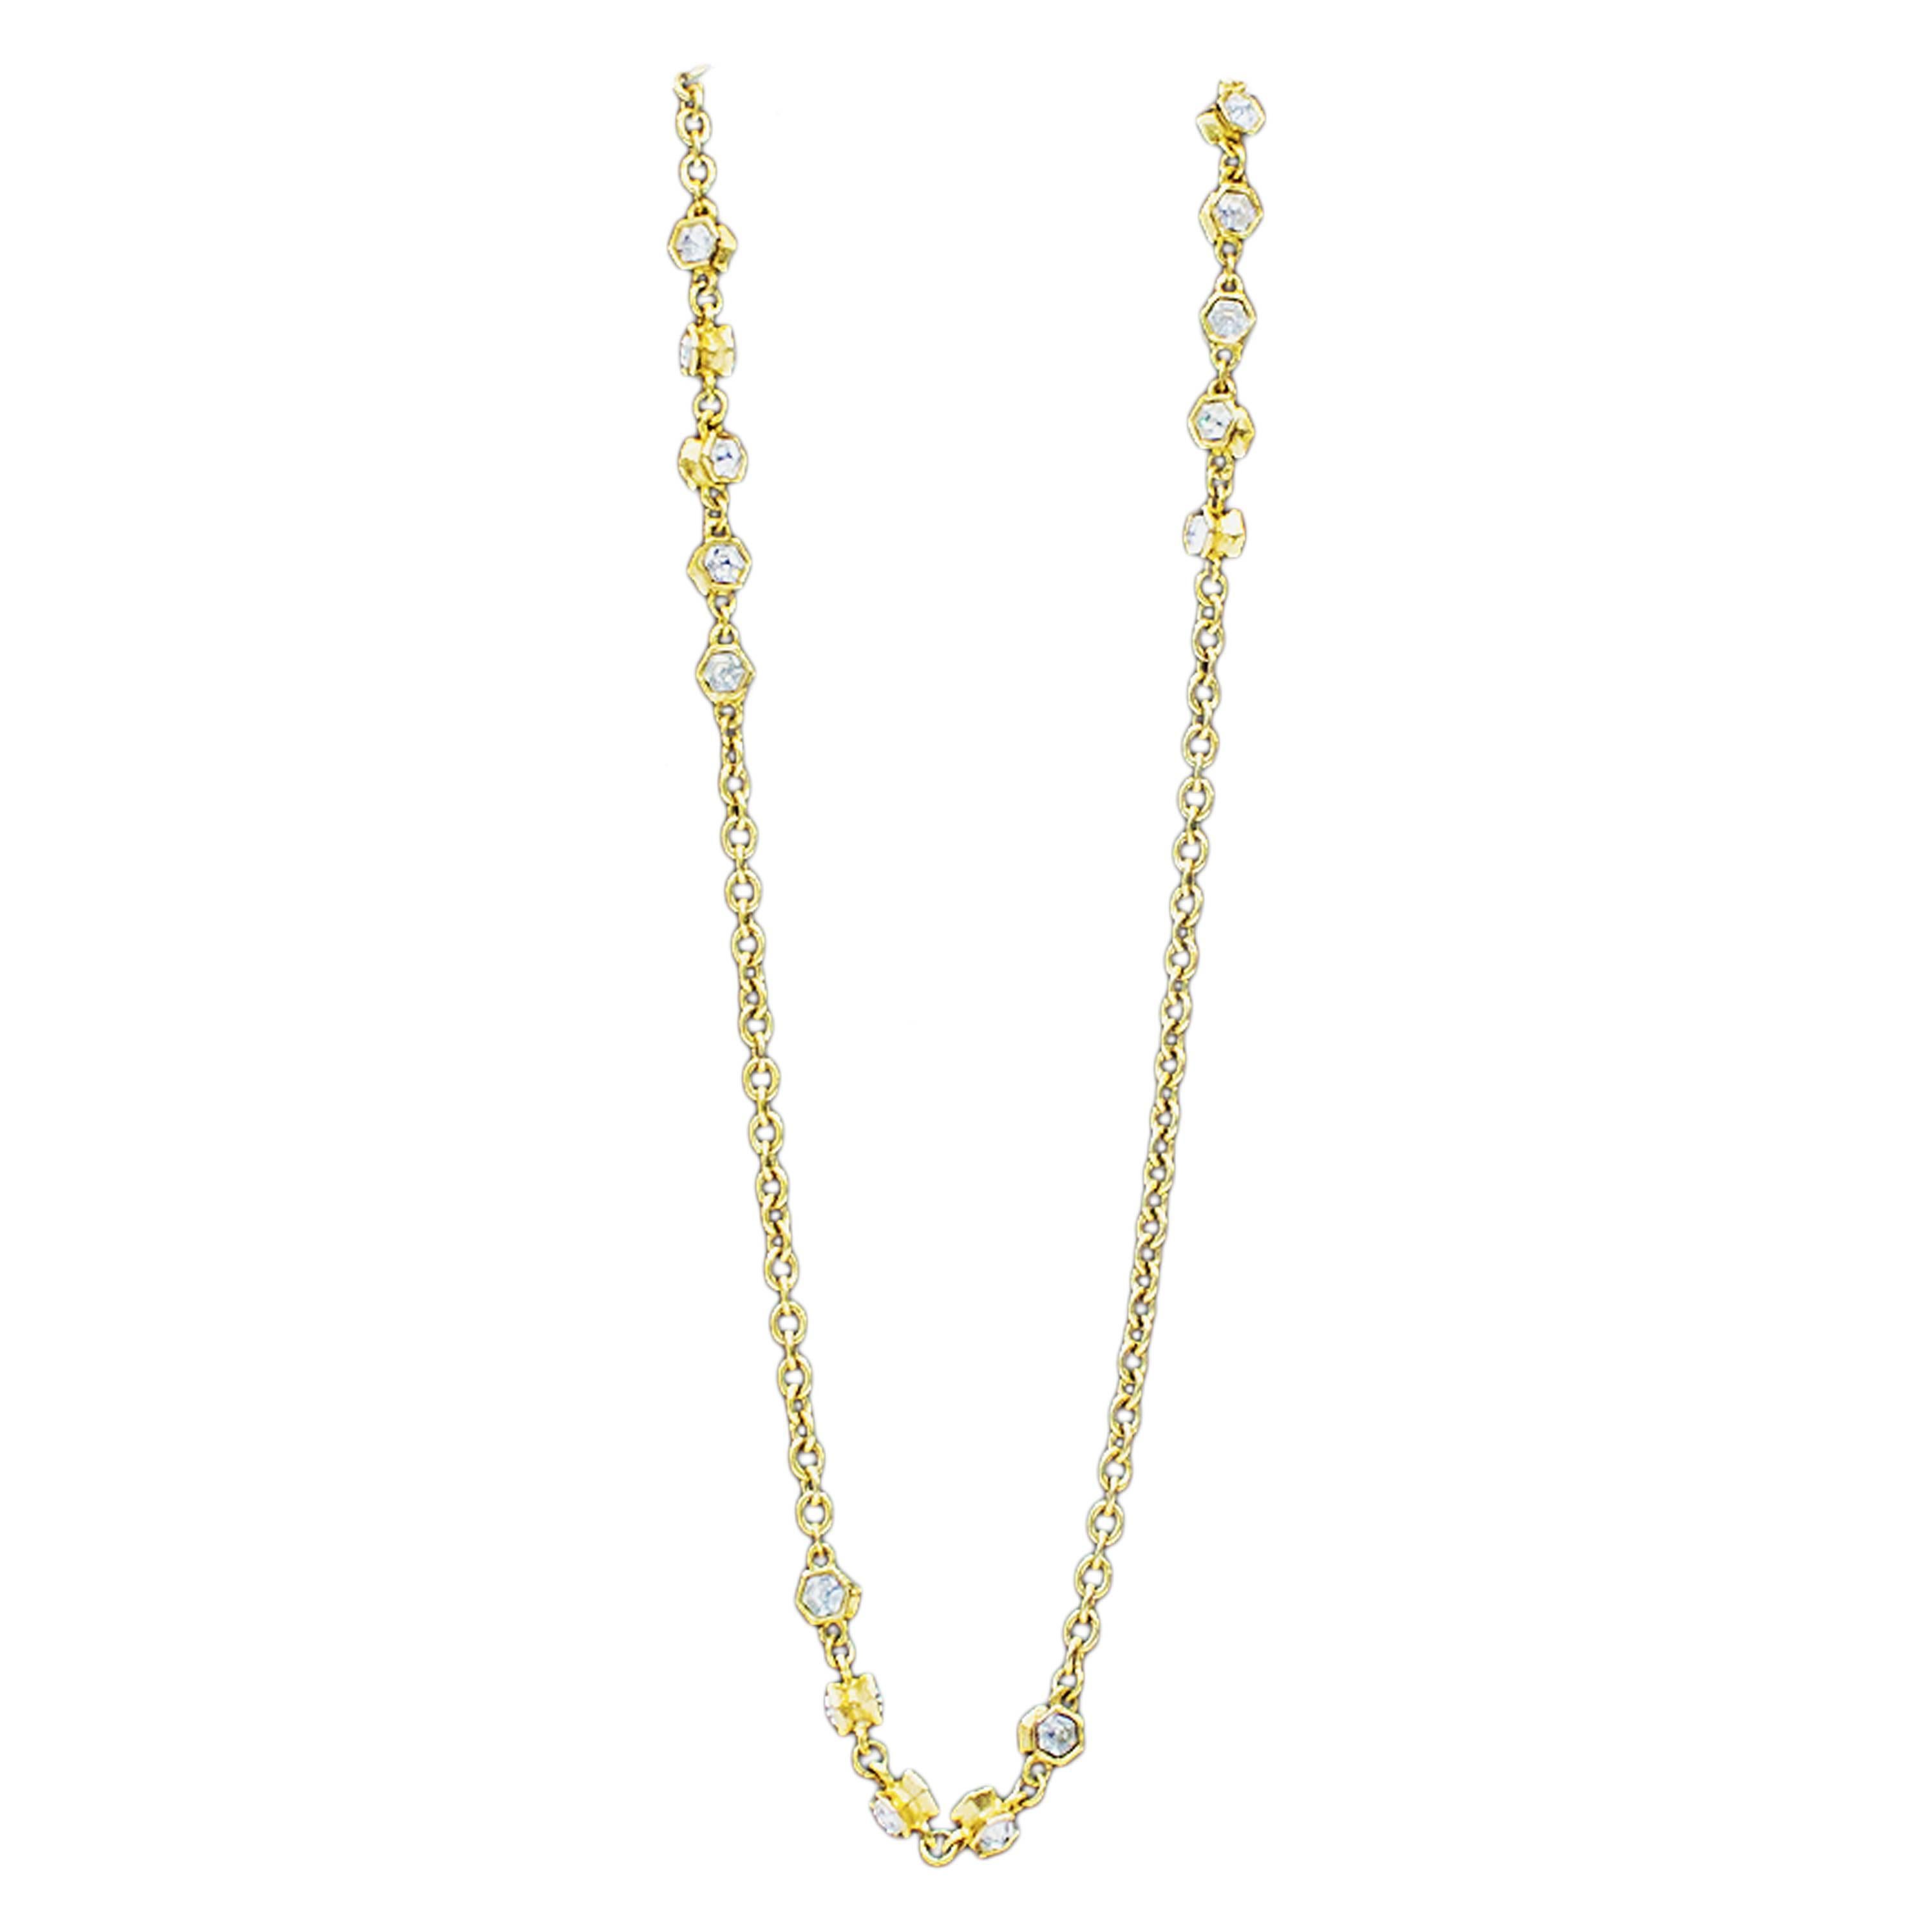 1970's Chanel Gold Chain Sautoir Necklace with Rhinestones For Sale